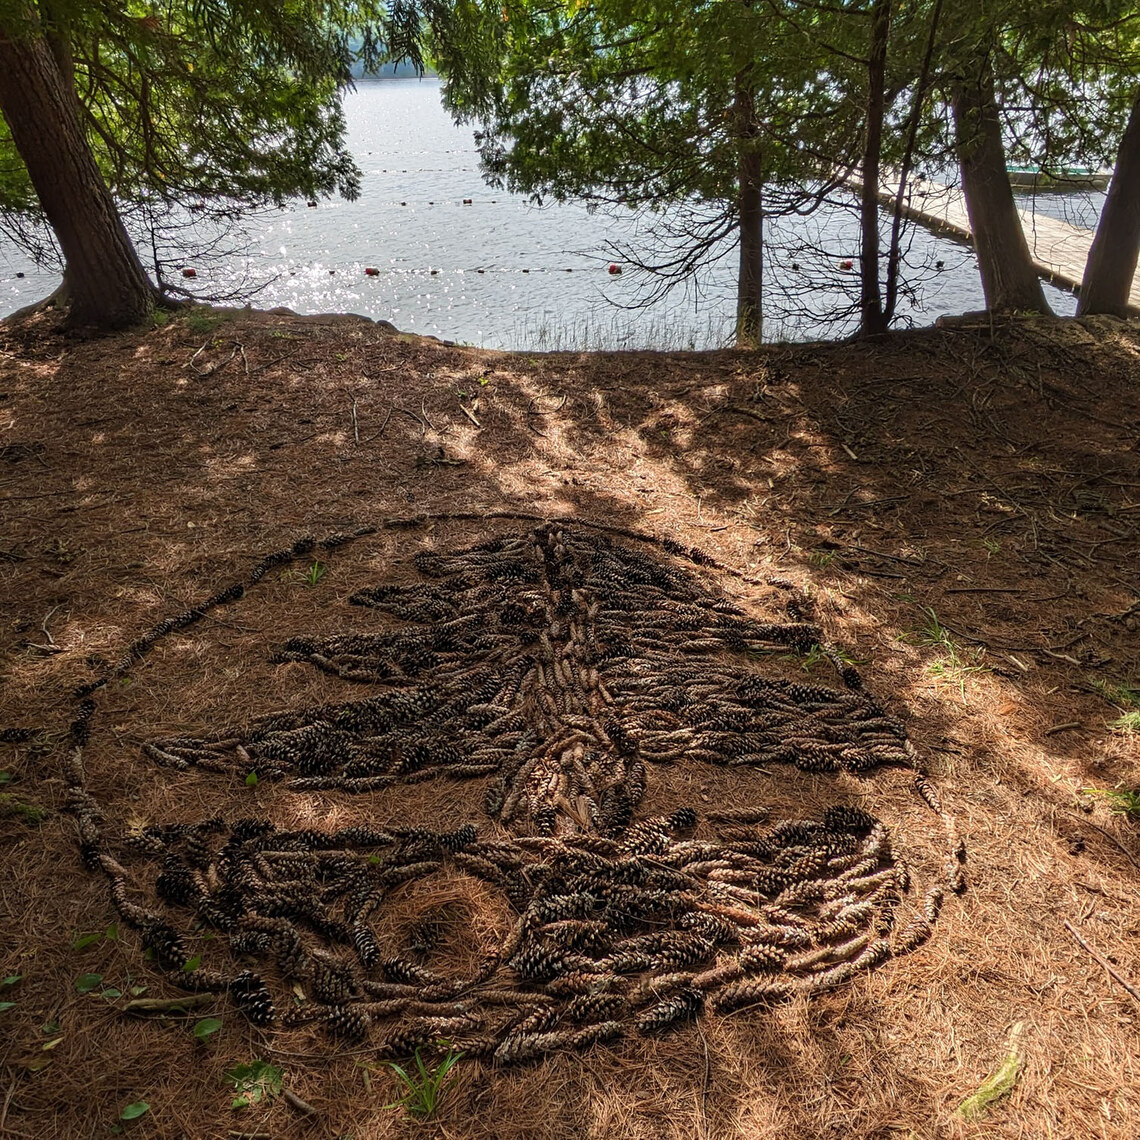 The camp symbol made out of pinecones and sticks